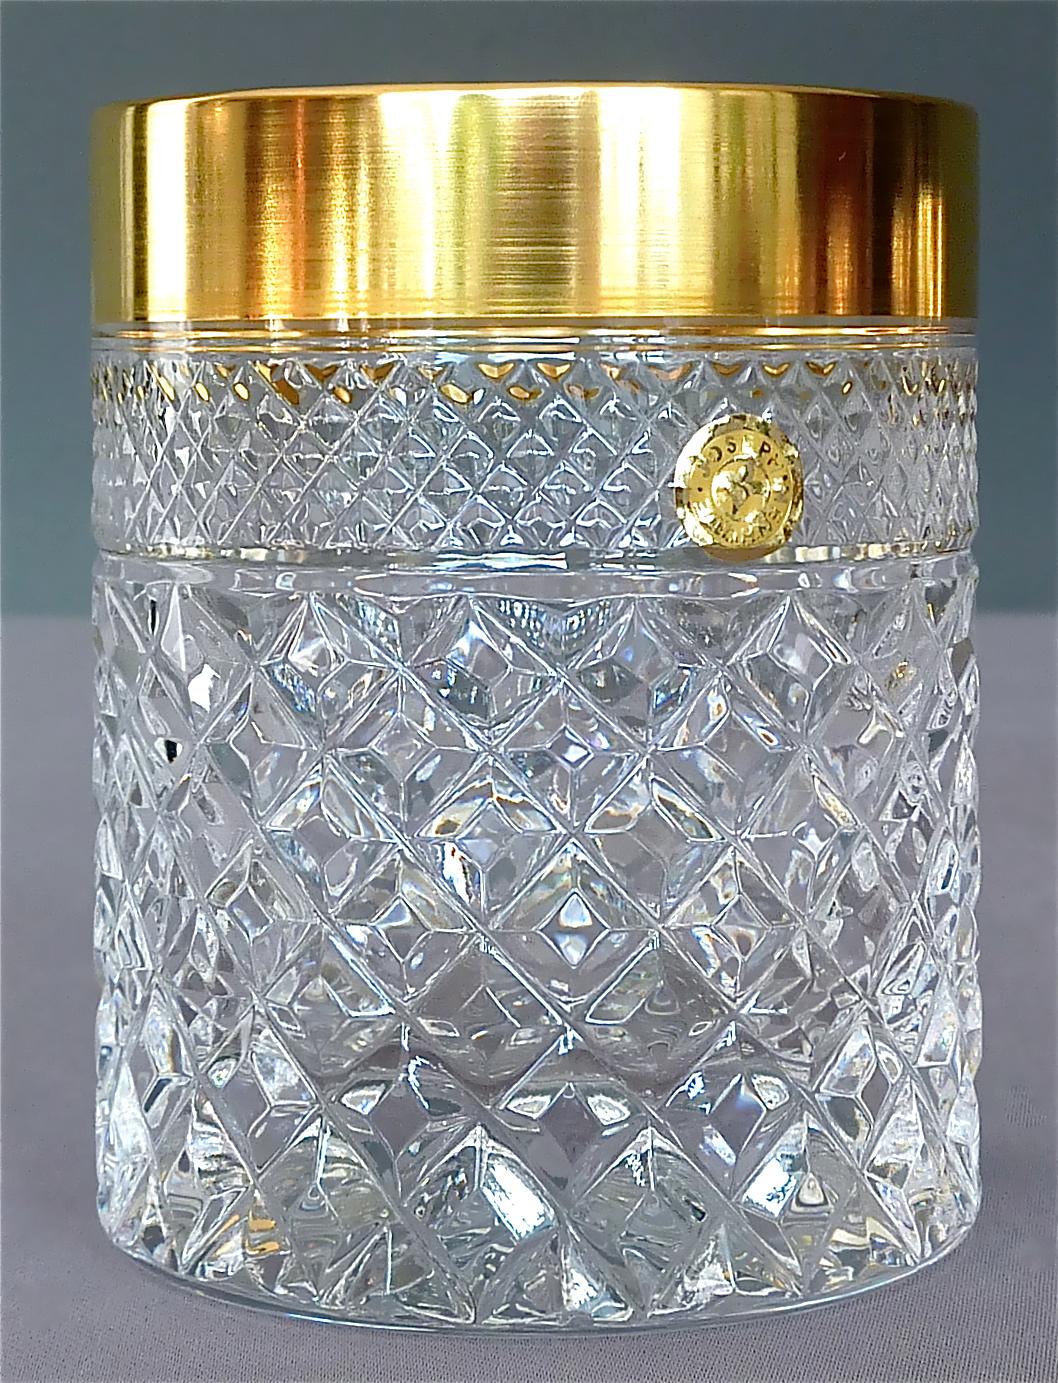 Gorgeous 20th century handcrafted faceted crystal glass set with 24-carat gold rim made by Josephinenhütte Moser circa 1960-1970 and very in the style of the exclusive French company Baccarat or Saint Louis thistle. This exquisite set of 6 whisky